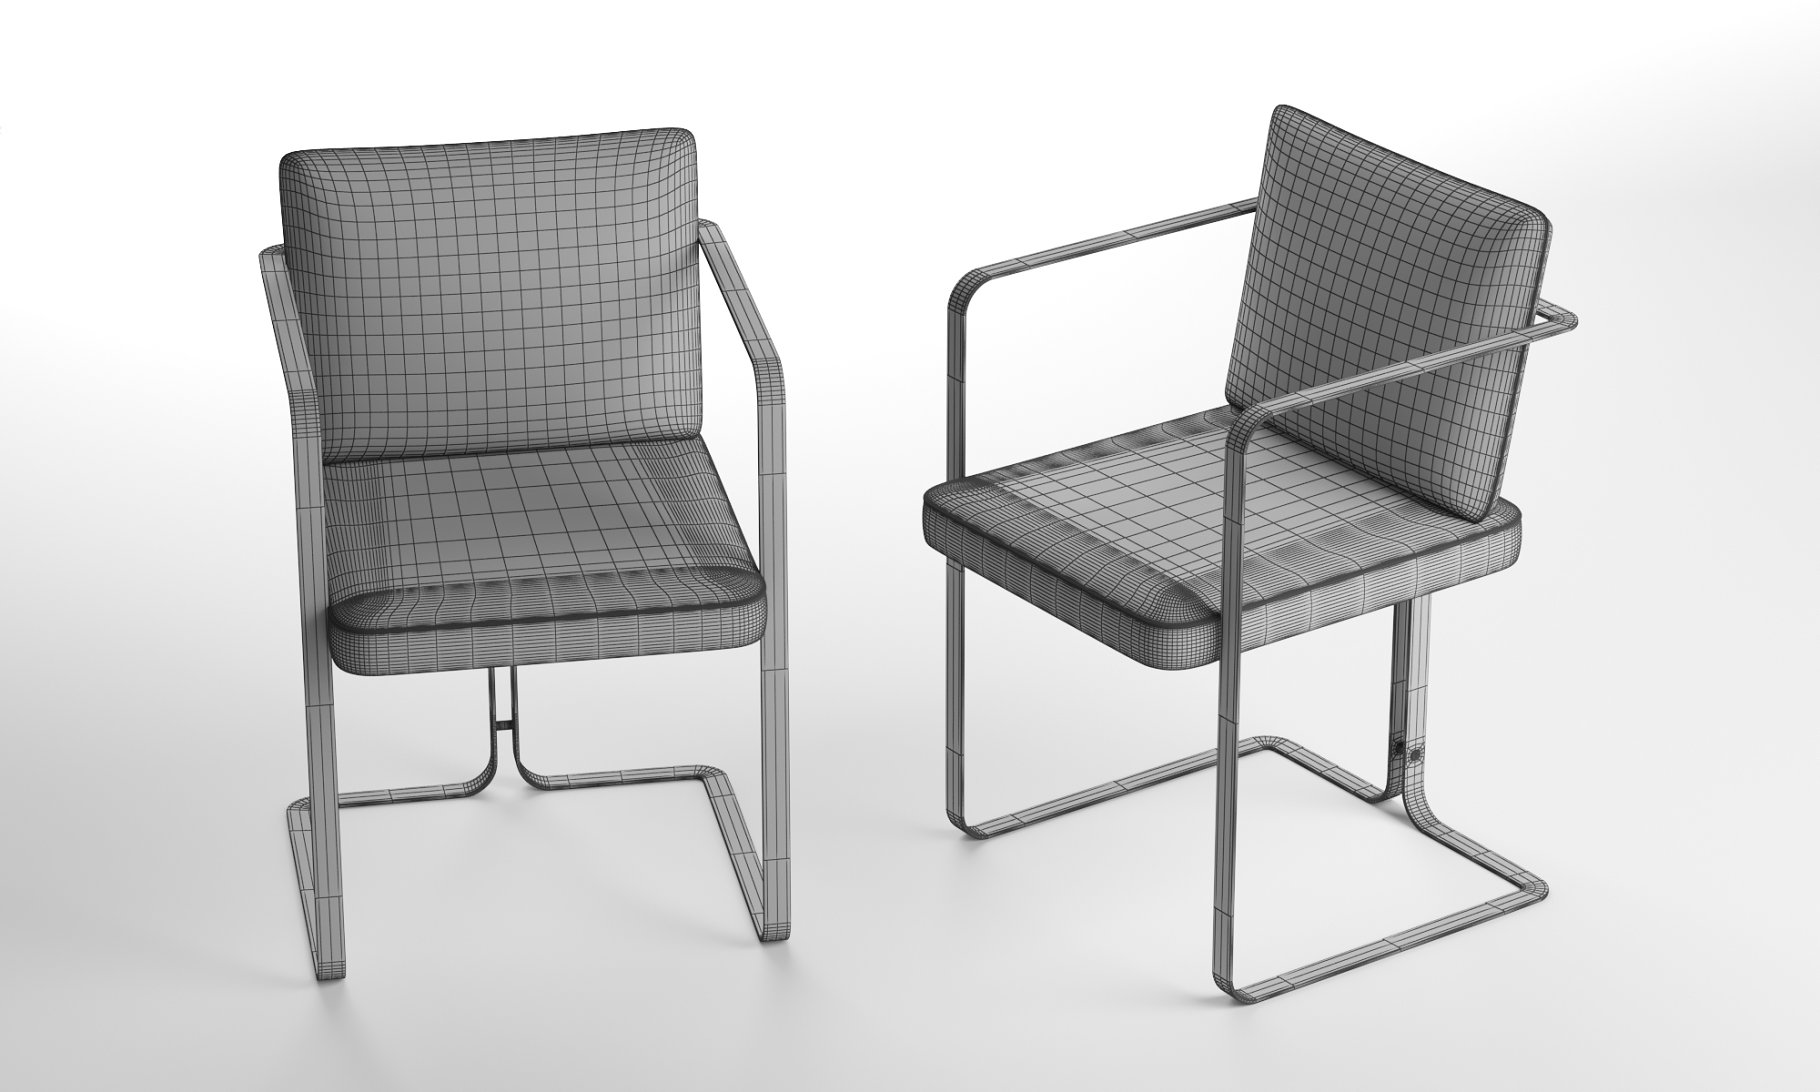 Rendering of an elegant 3d model of an armchair without texture